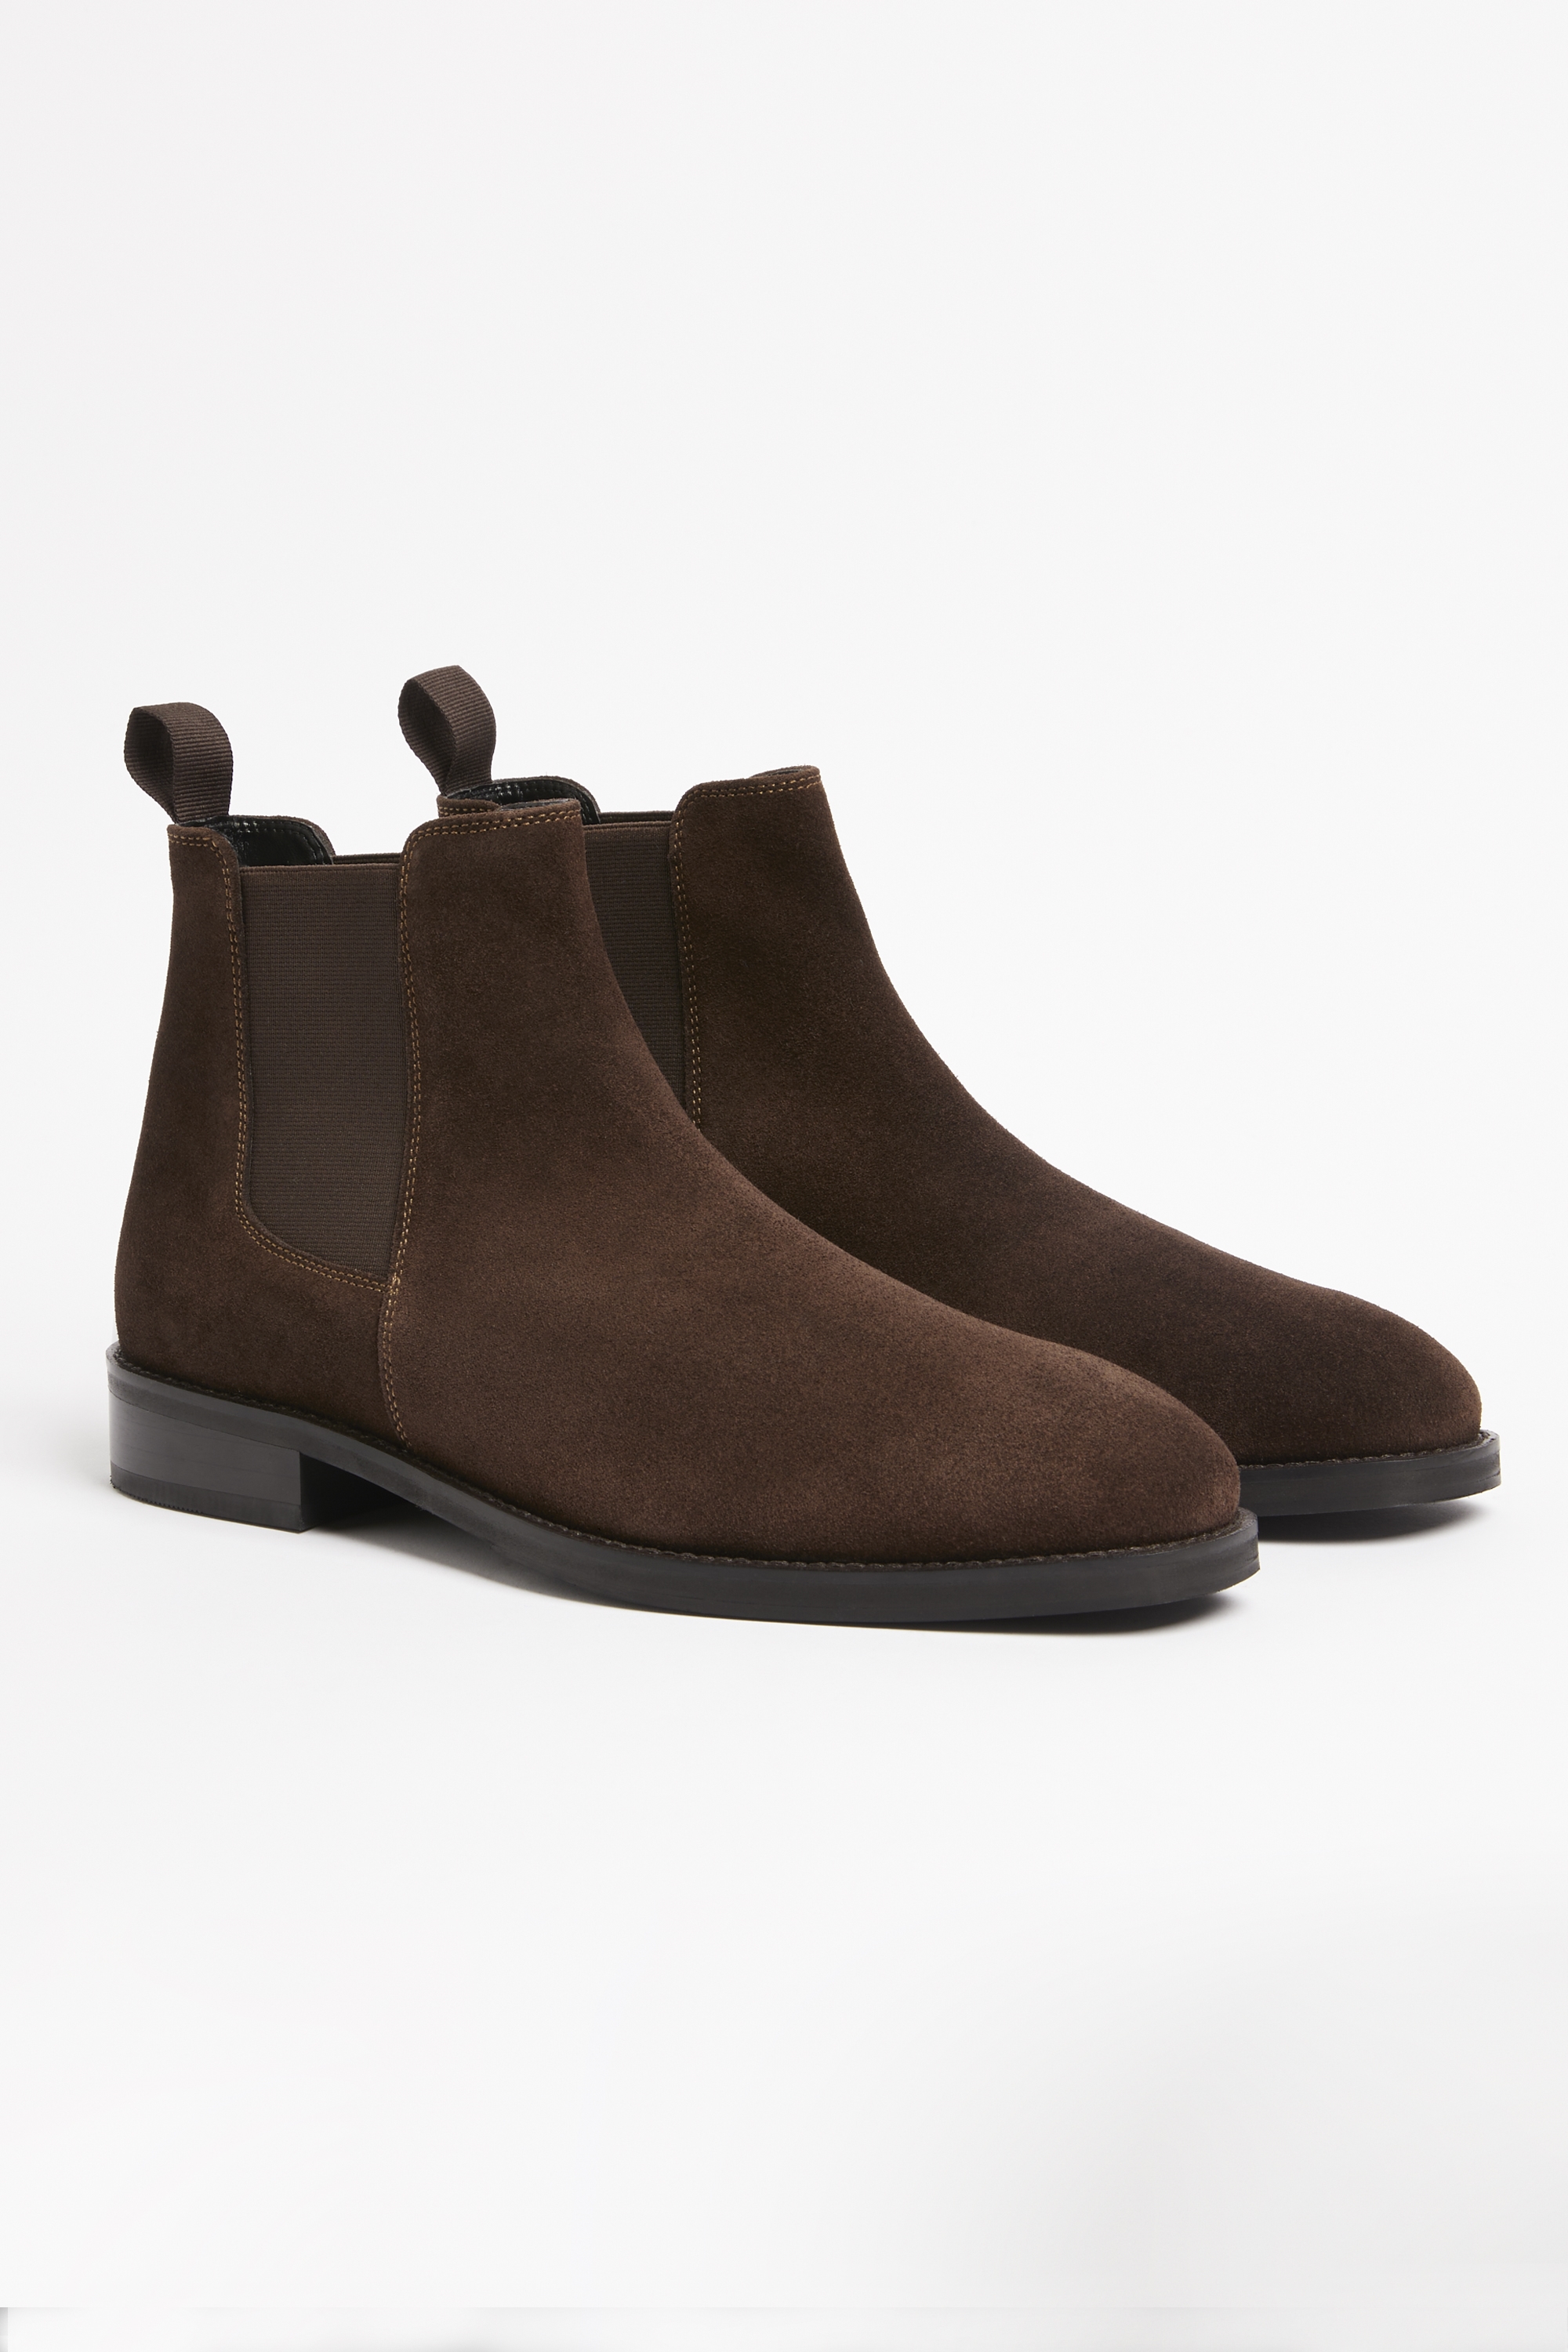 Seaford Brown Chelsea Boots